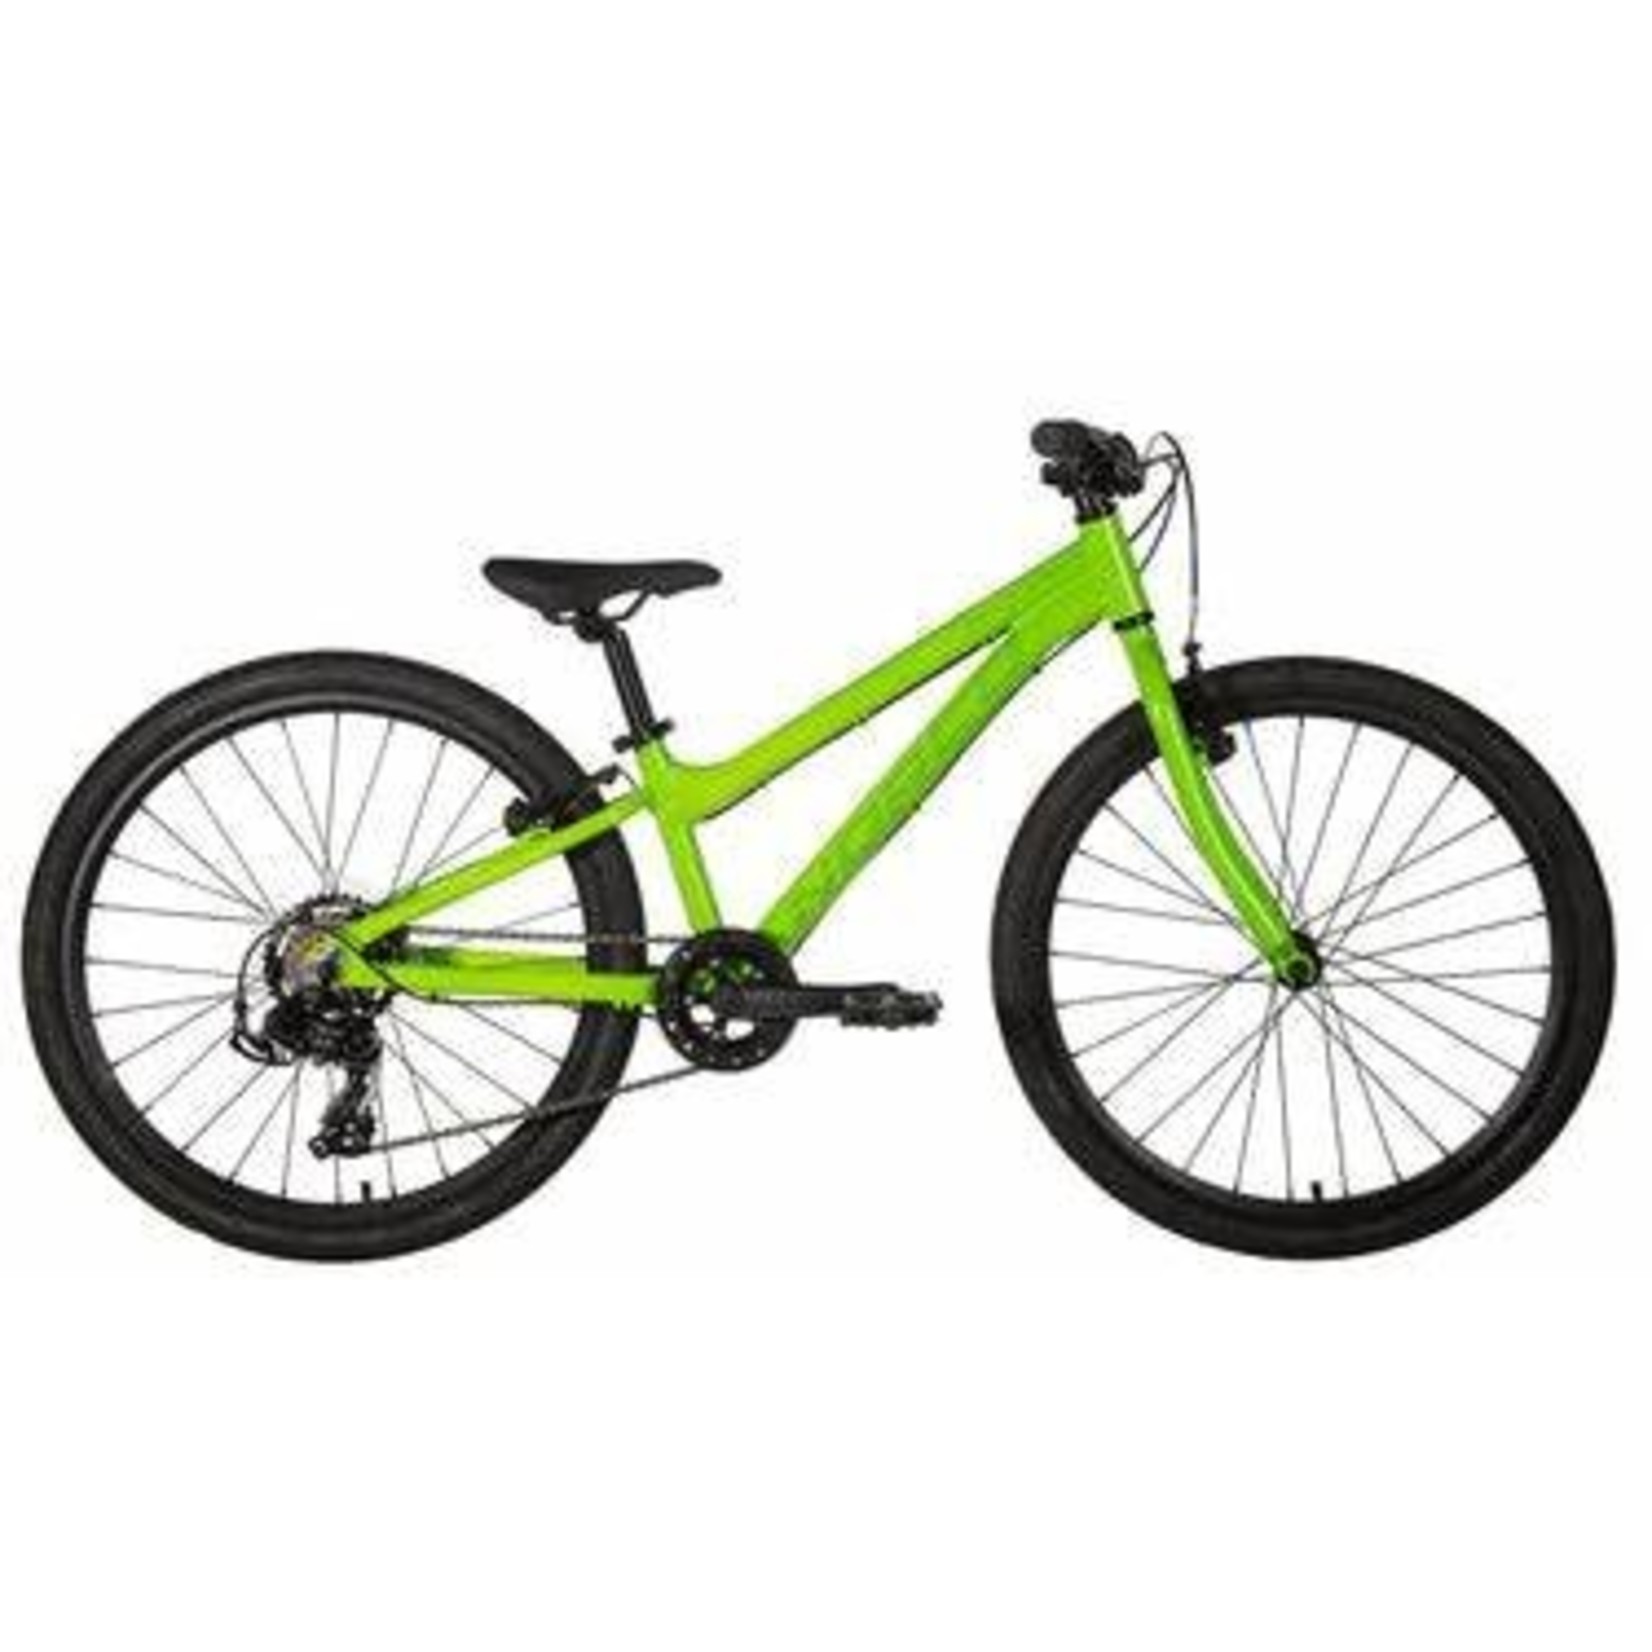 NORCO STORM 4.3 GREEN